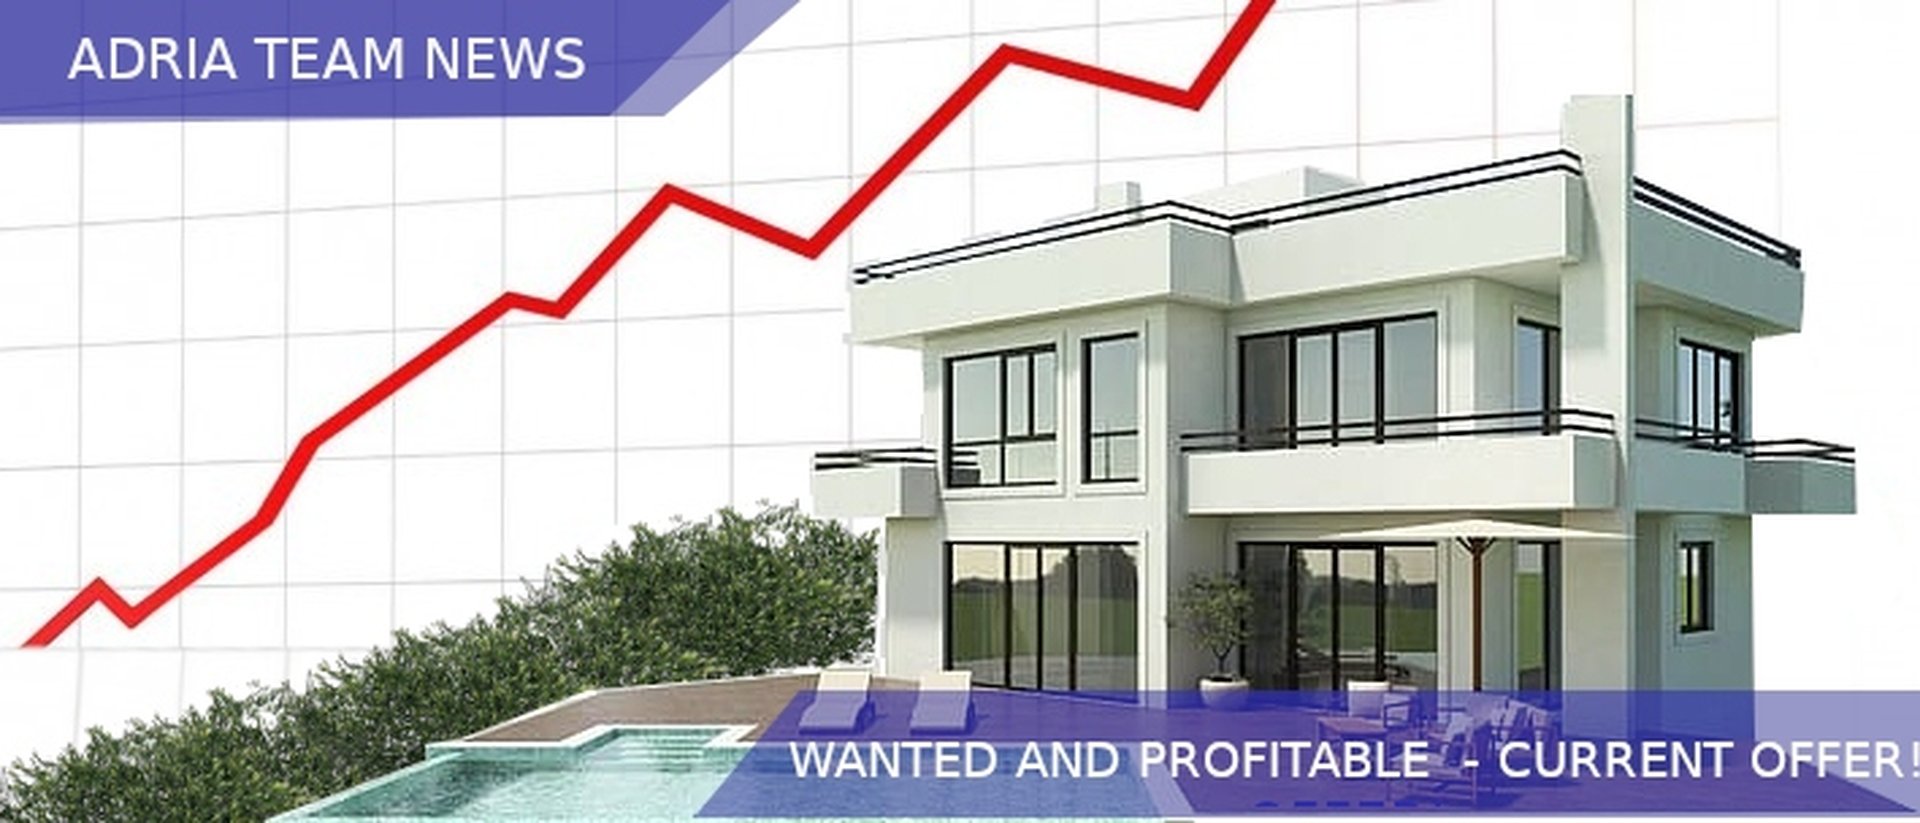 ADRIATEAM NEWS - WANTED AND PROFITABLE REAL ESTATES - CURRENT OFFER!